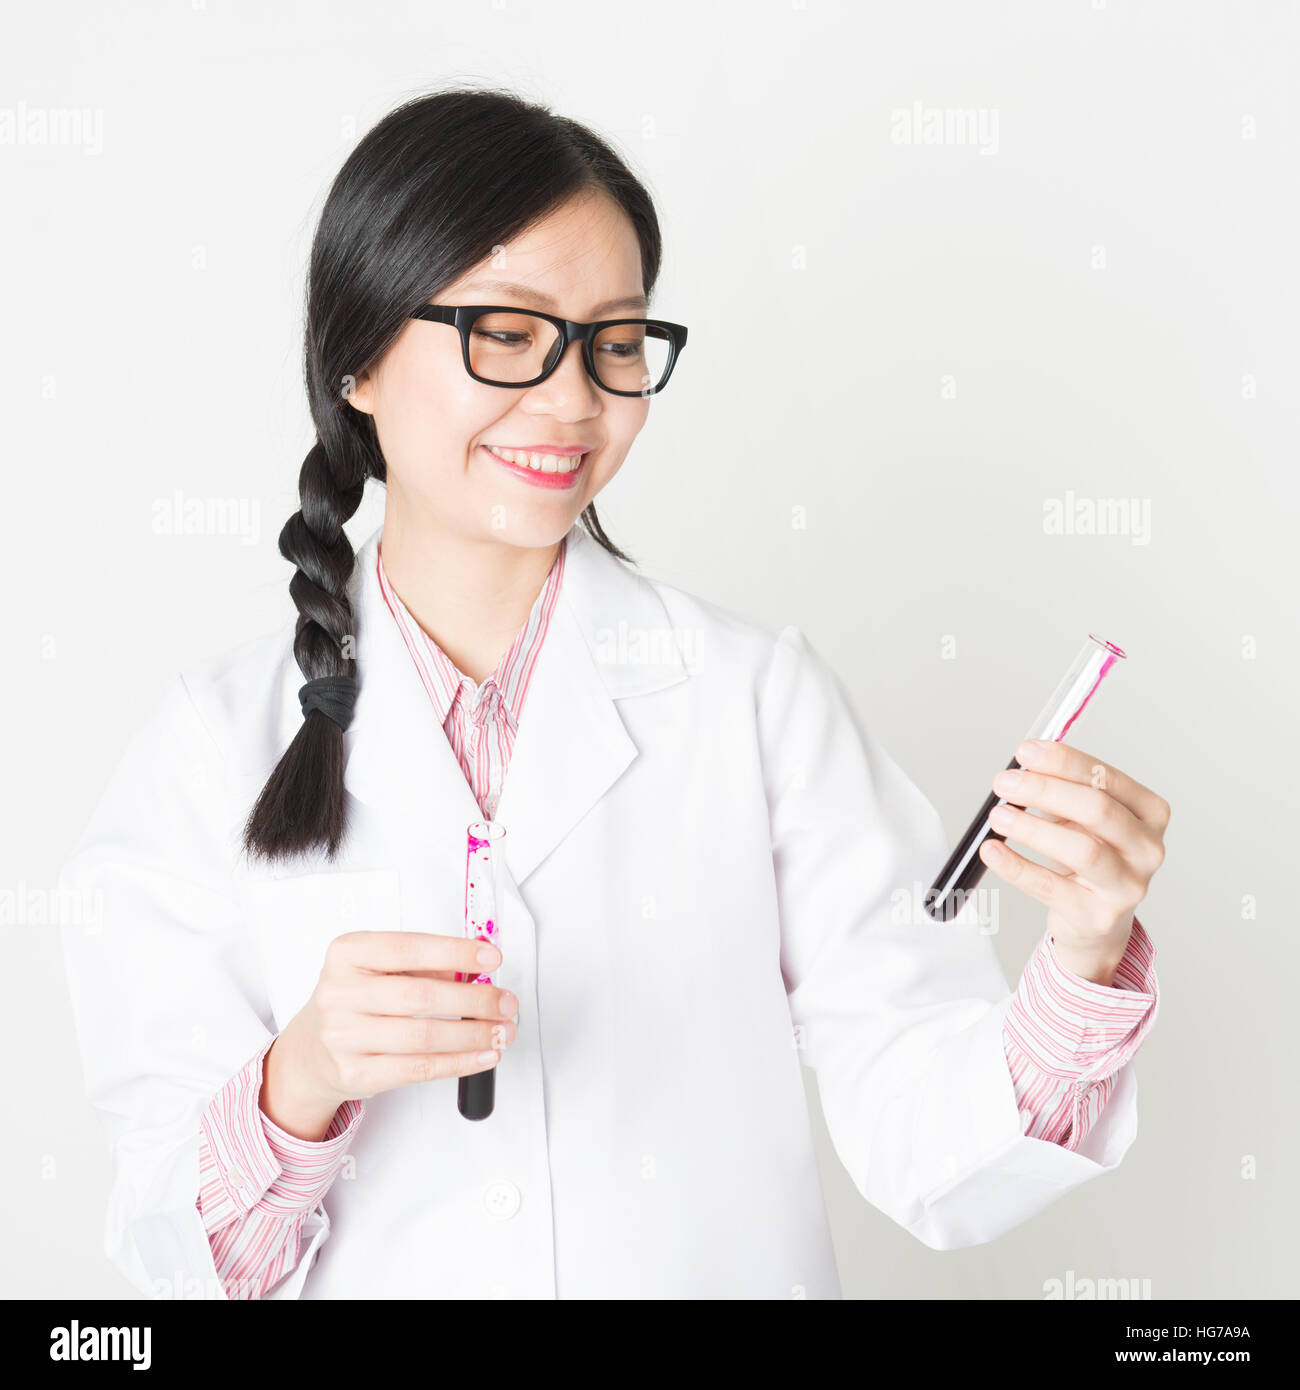 Young attractive laboratory assistant checking the blood in tube, portrait shot of a female scientist. Stock Photo